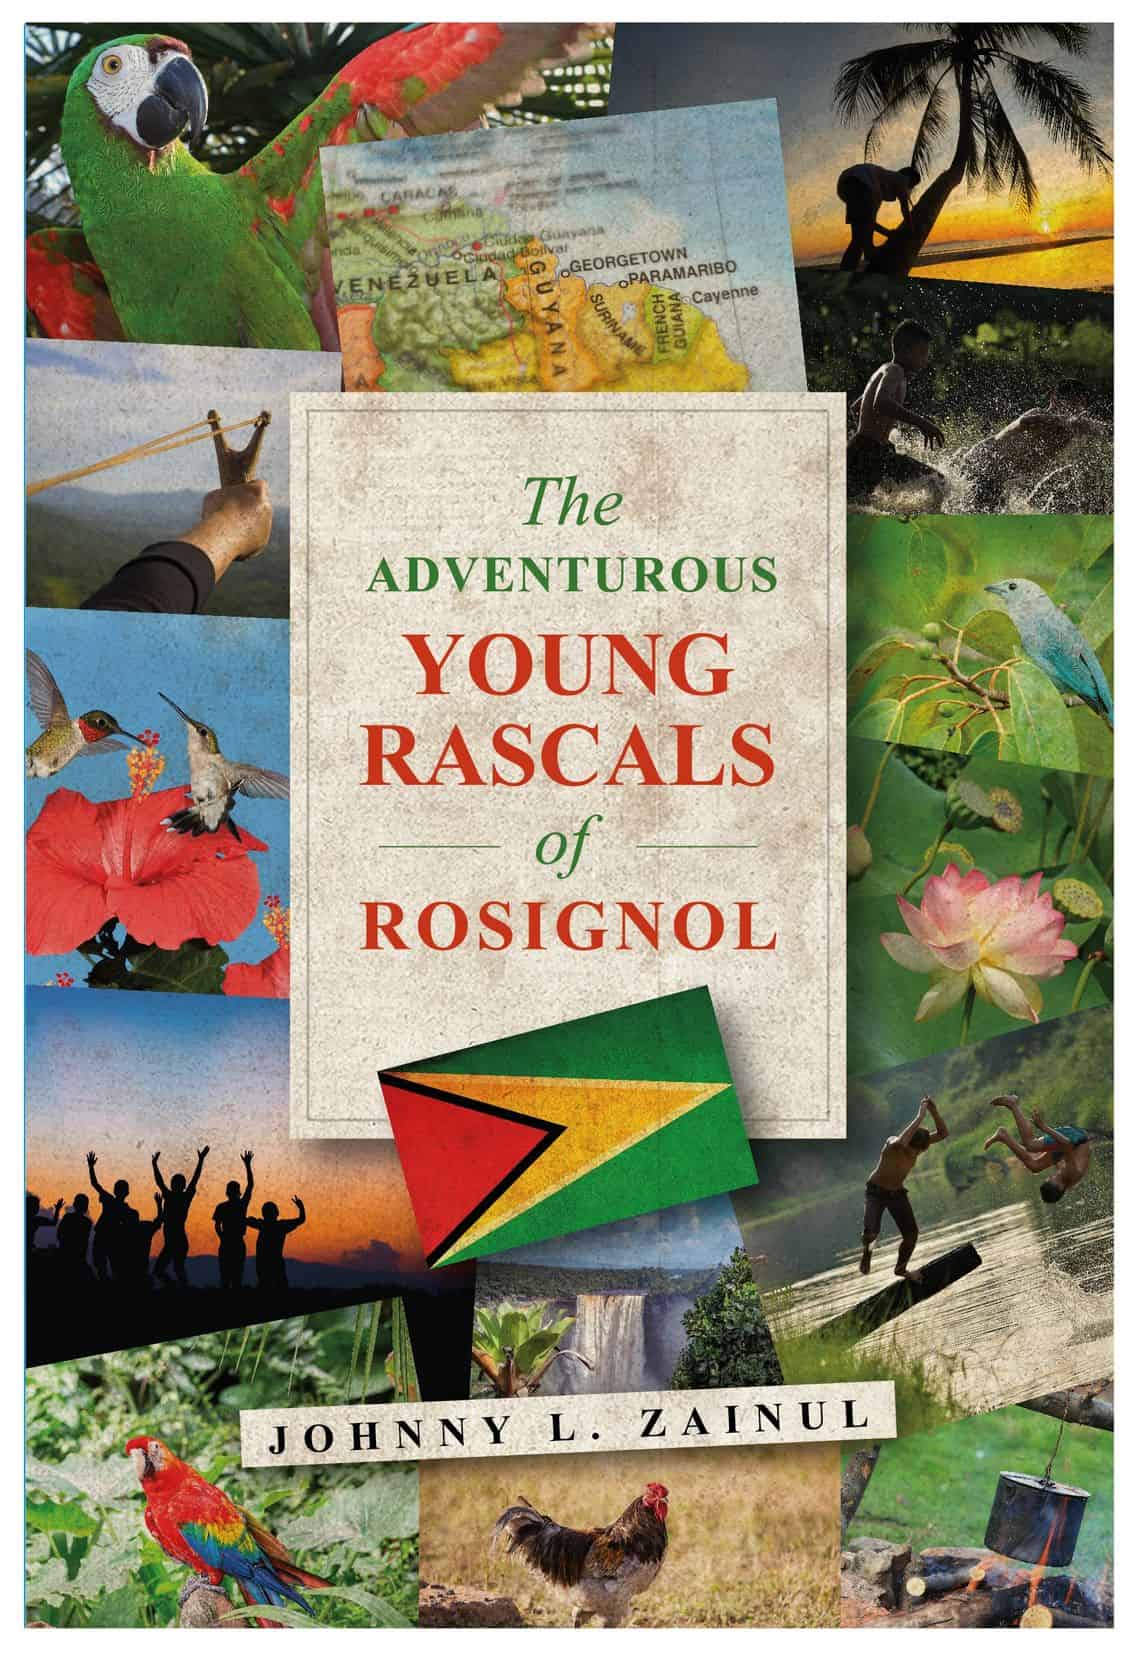 The Adventurous Young Rascals of Rosignol